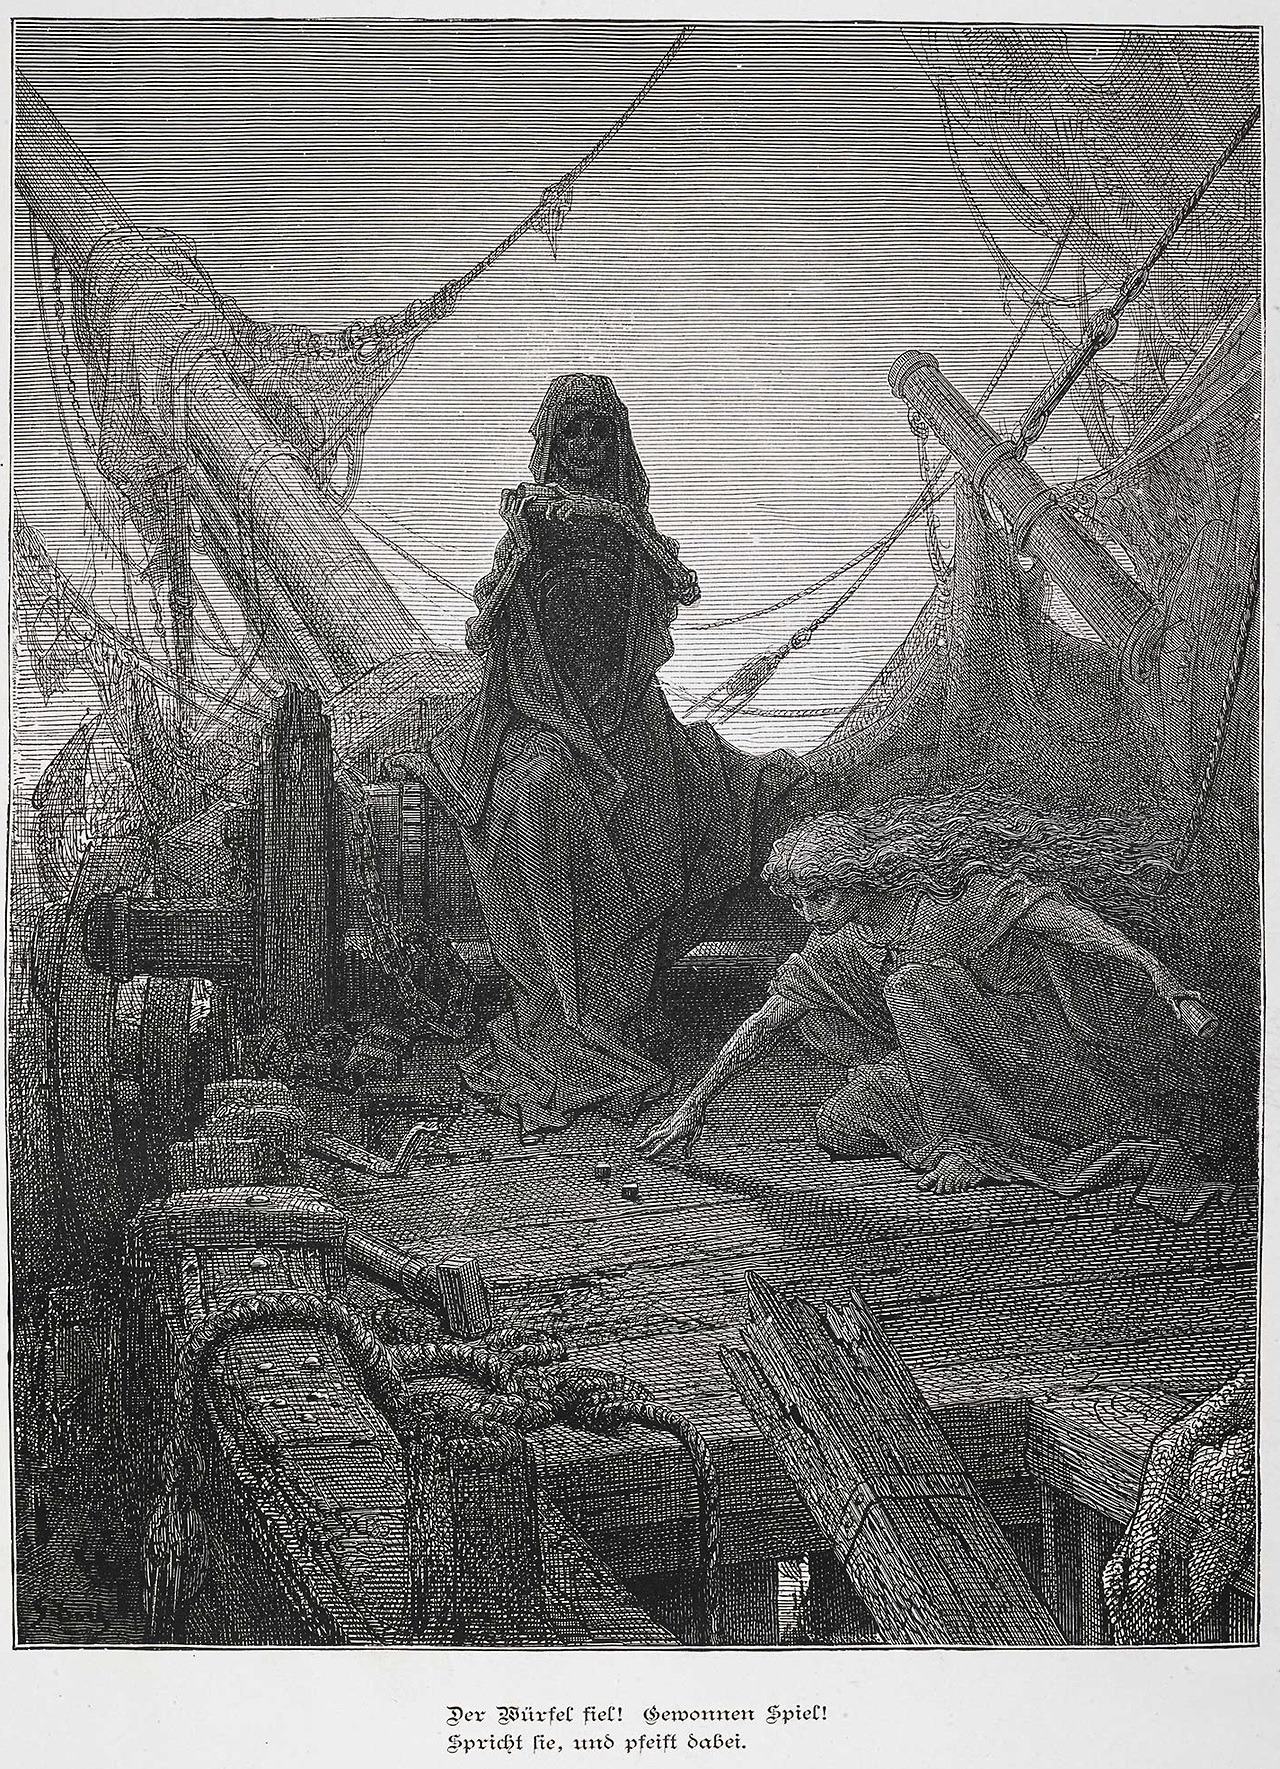 thefugitivesaint:
“Gustave Doré (1832-1883), ‘Der bürfel fiel’ (The Dice Fell), from “The Rime of the Ancient Mariner” by Samuel Taylor Coleridge, 1877
Source: https://www.bl.uk/collection-items/the-ancient-mariner-illustrations-by-dore
”